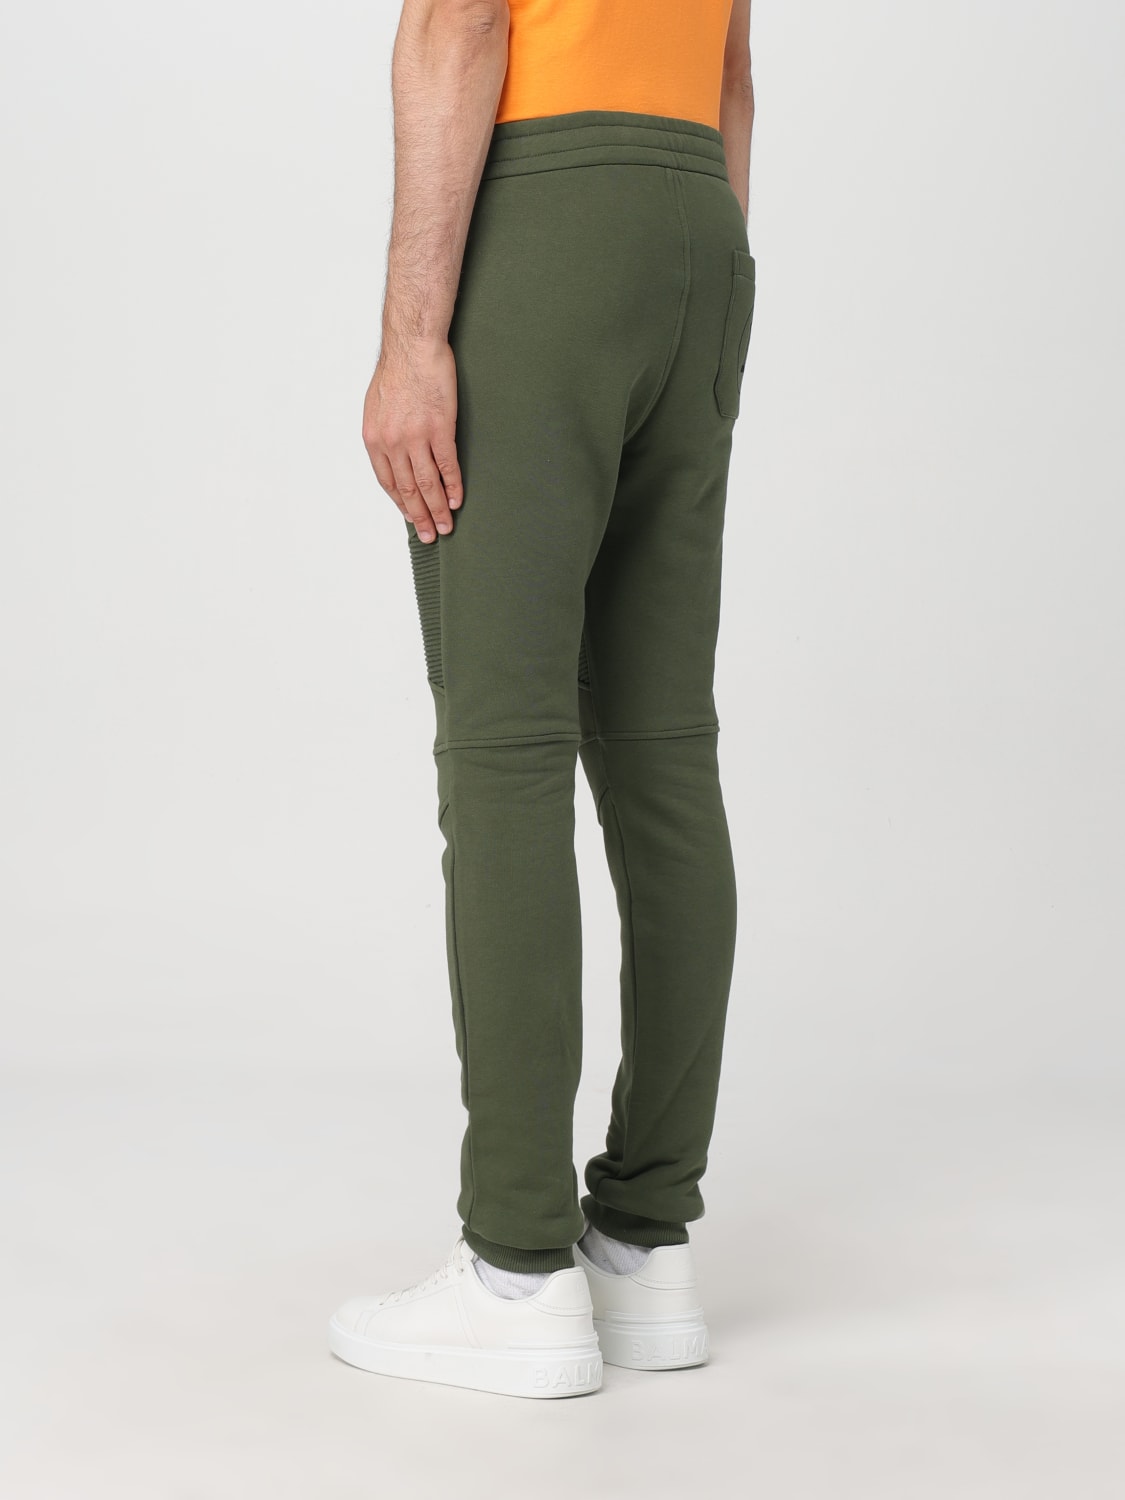 Collection Of Designer Trousers For Men